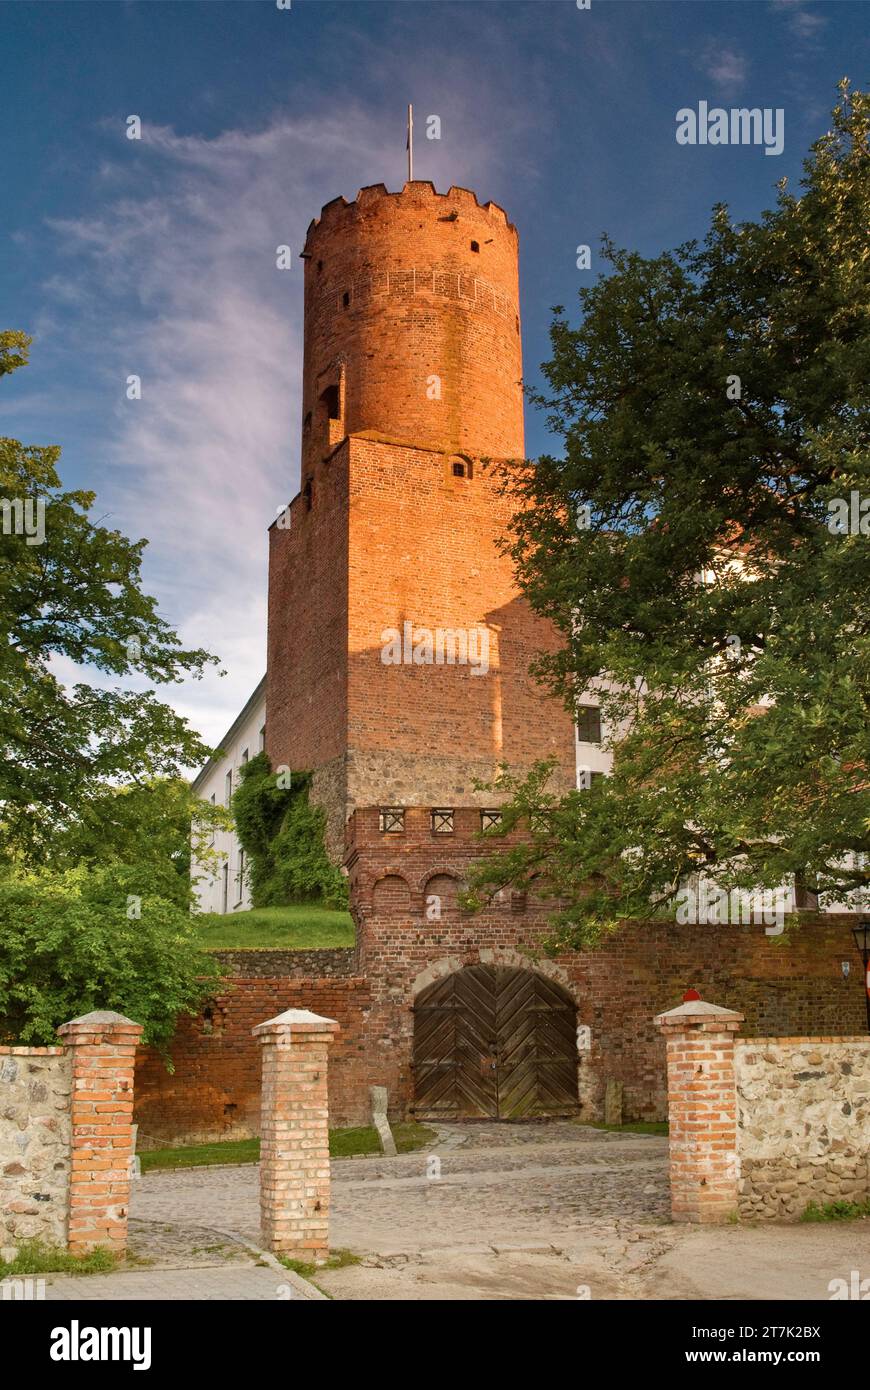 Entrance and tower at Castle of Knights of St John of Jerusalem in Łagów, Lubuskie Voivodeship,  Poland Stock Photo